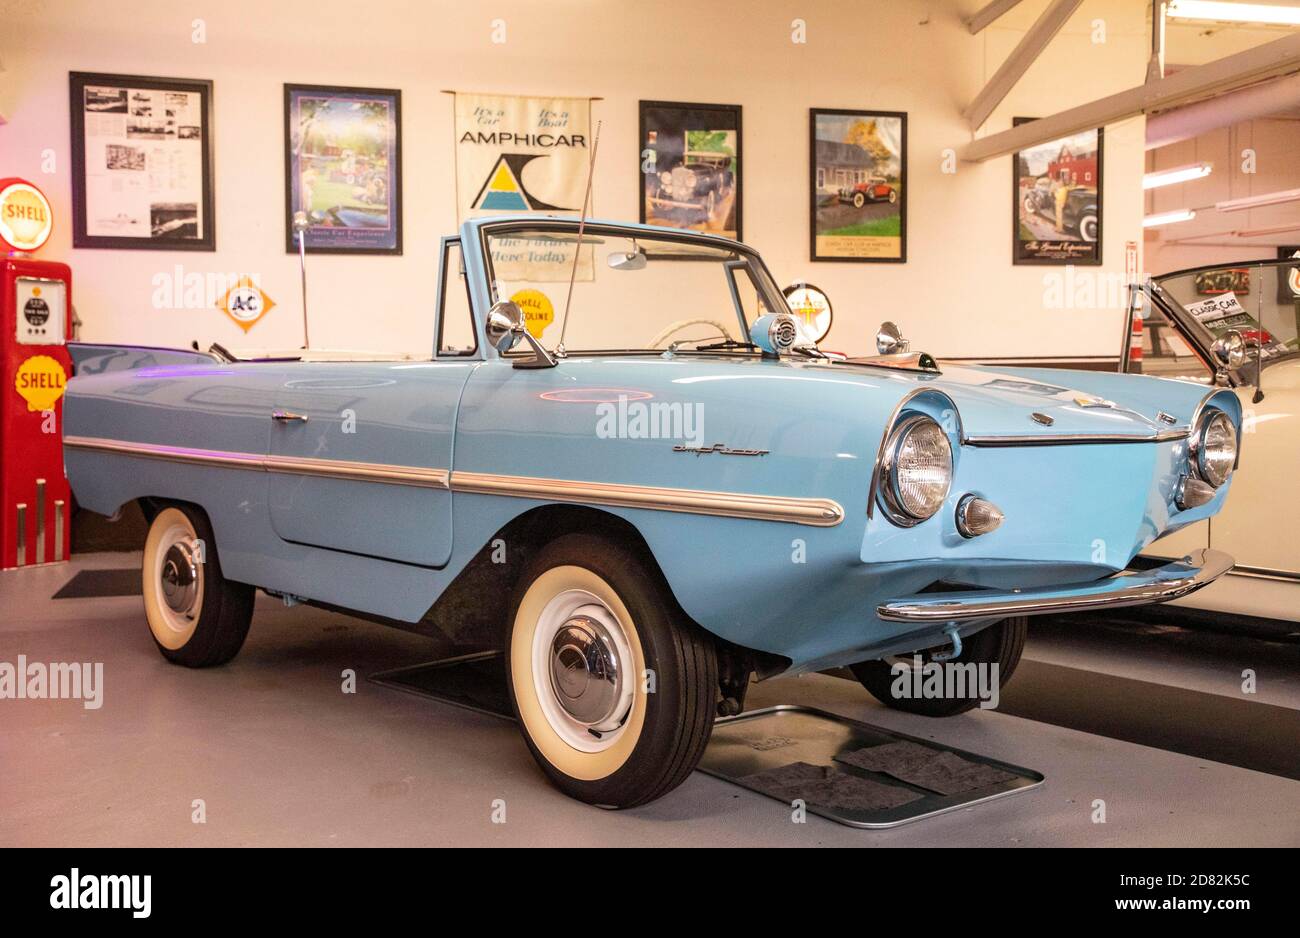 Chicago, USA. 25th Oct, 2020. A 1964 Amphicar 770 Convertible is seen at Klairmont Kollections in Chicago, Illinois, the United States, on Oct. 25, 2020. Klairmont Kollections is a private car collection museum with an assemblage of over 300 vehicles. Credit: Joel Lerner/Xinhua/Alamy Live News Stock Photo